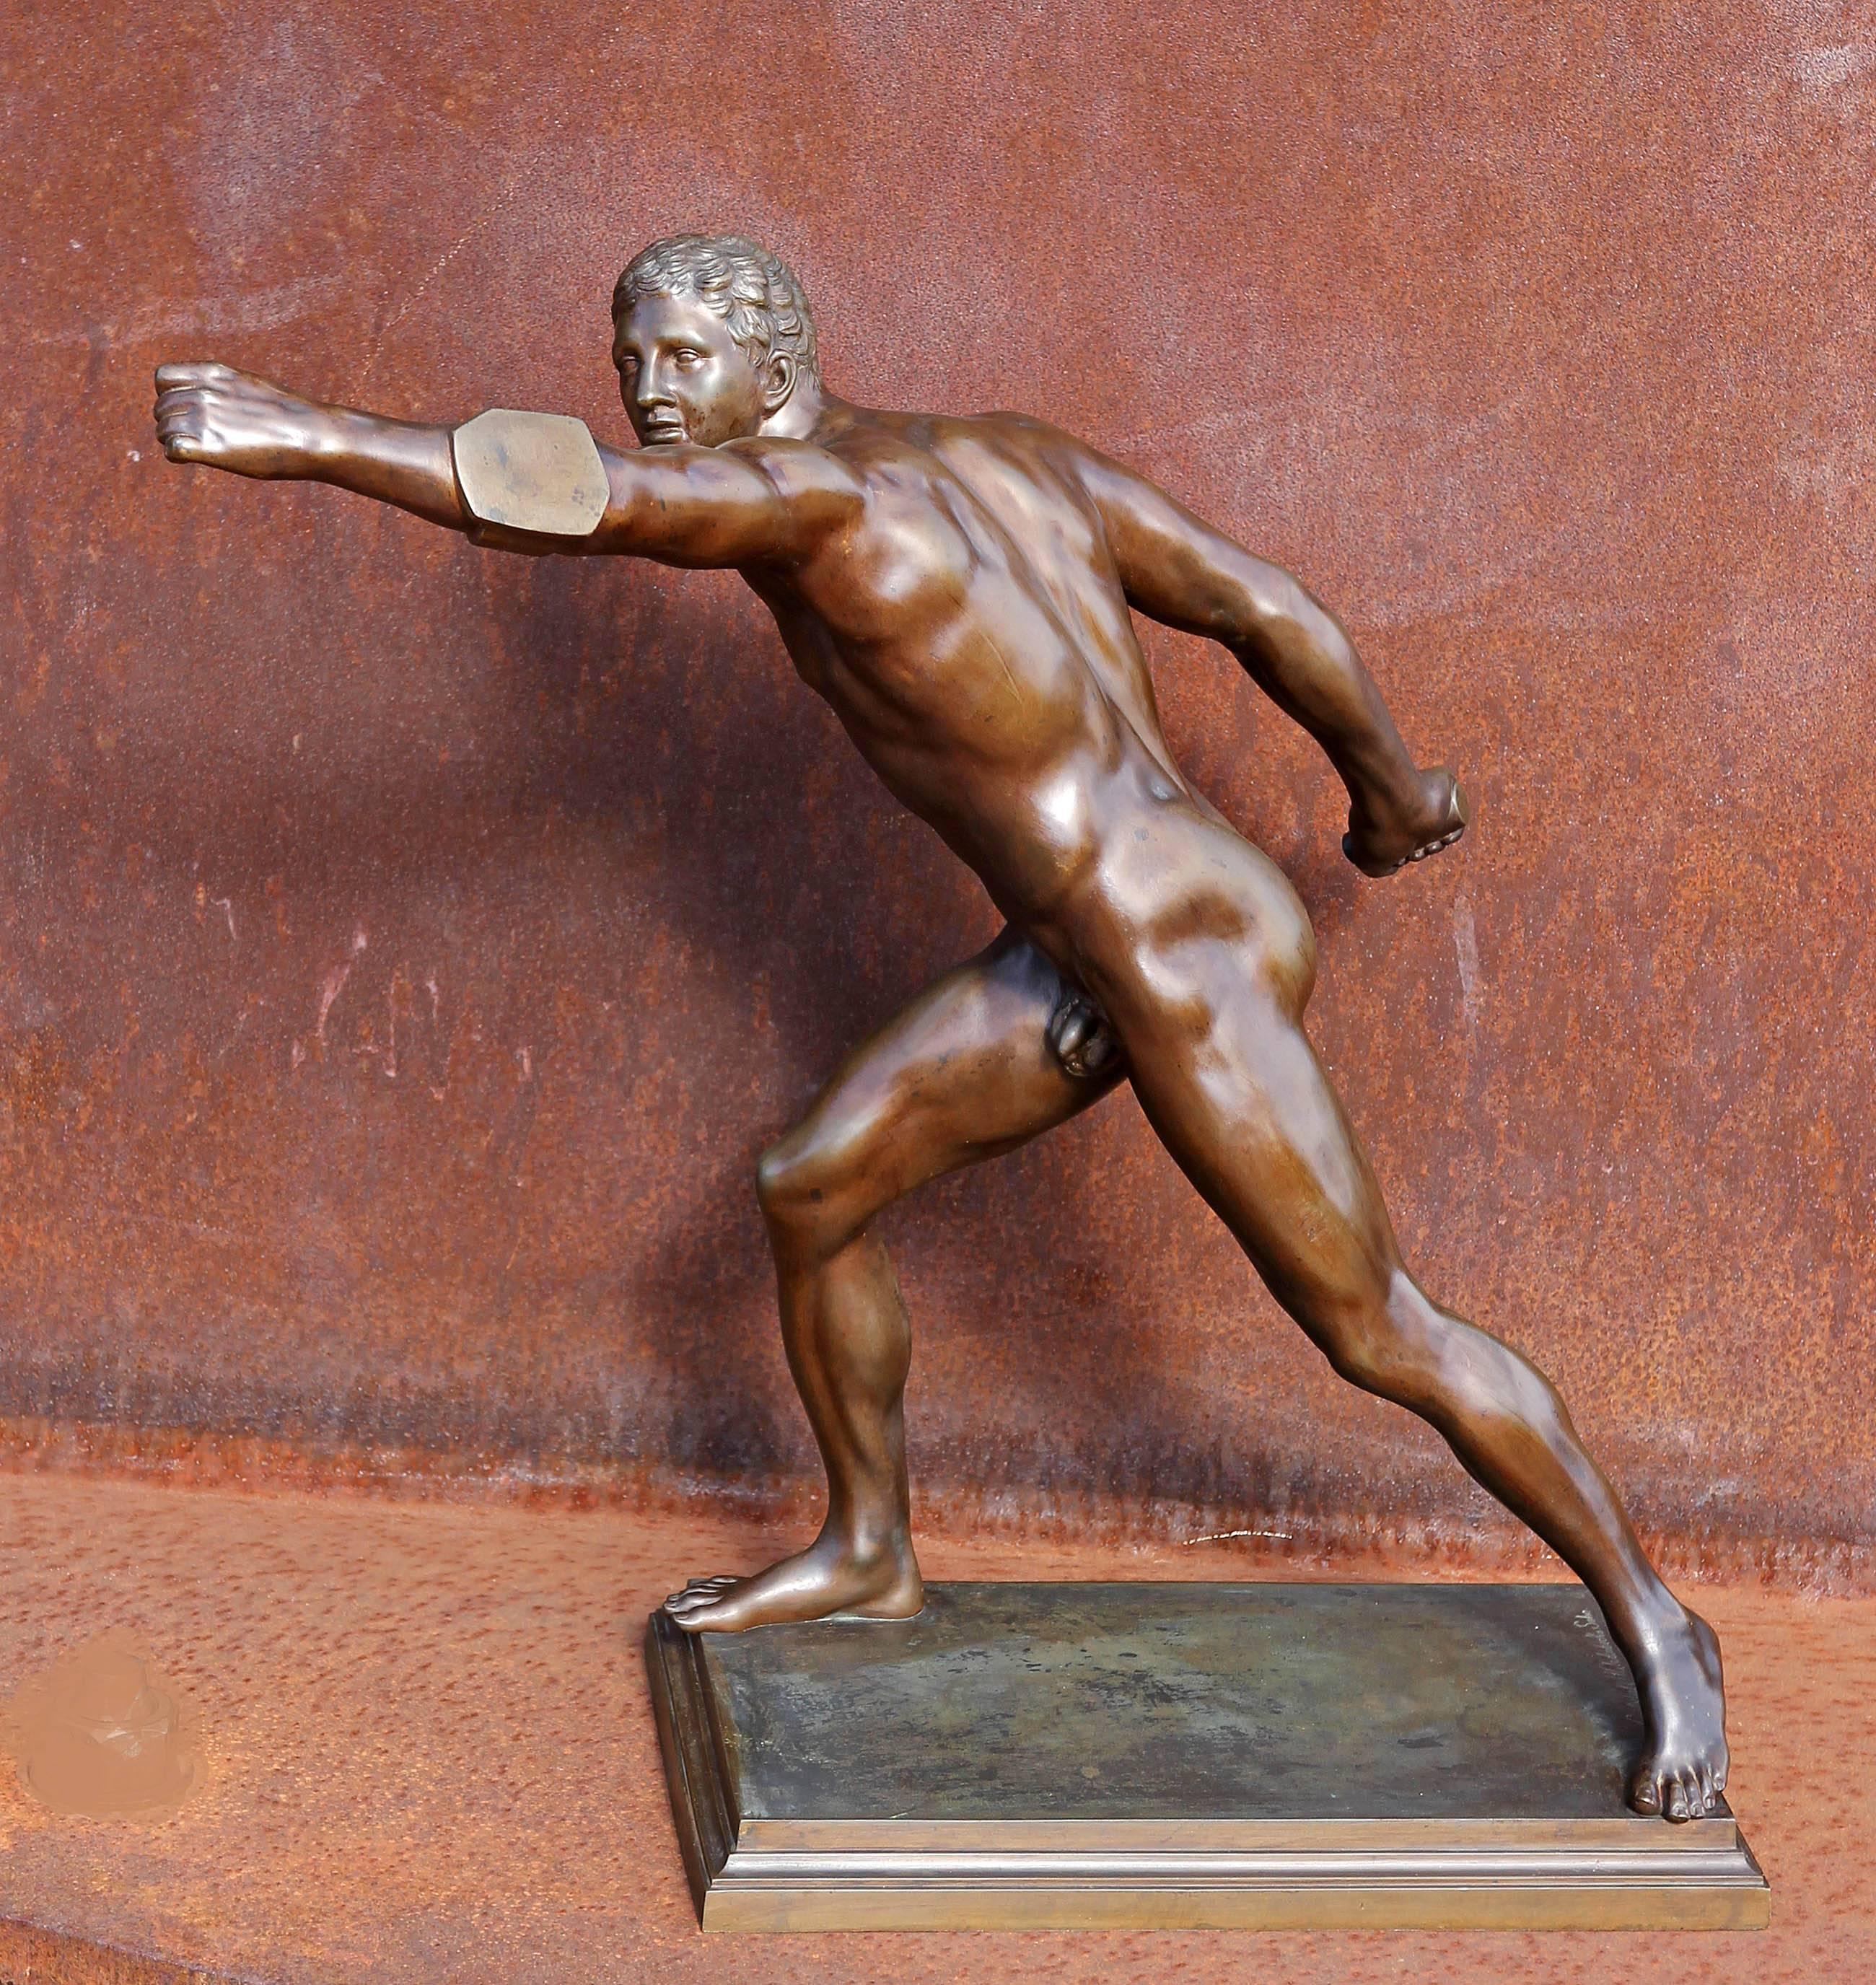 19th century bronze sculpture "The Borghese Gladiator", circa 1870s. Foundry mark for "Gladenbeck und Sohn". Gladenbeck foundry operated from 1851 until 1926. During the 75-year period when the foundry was in operation it was one